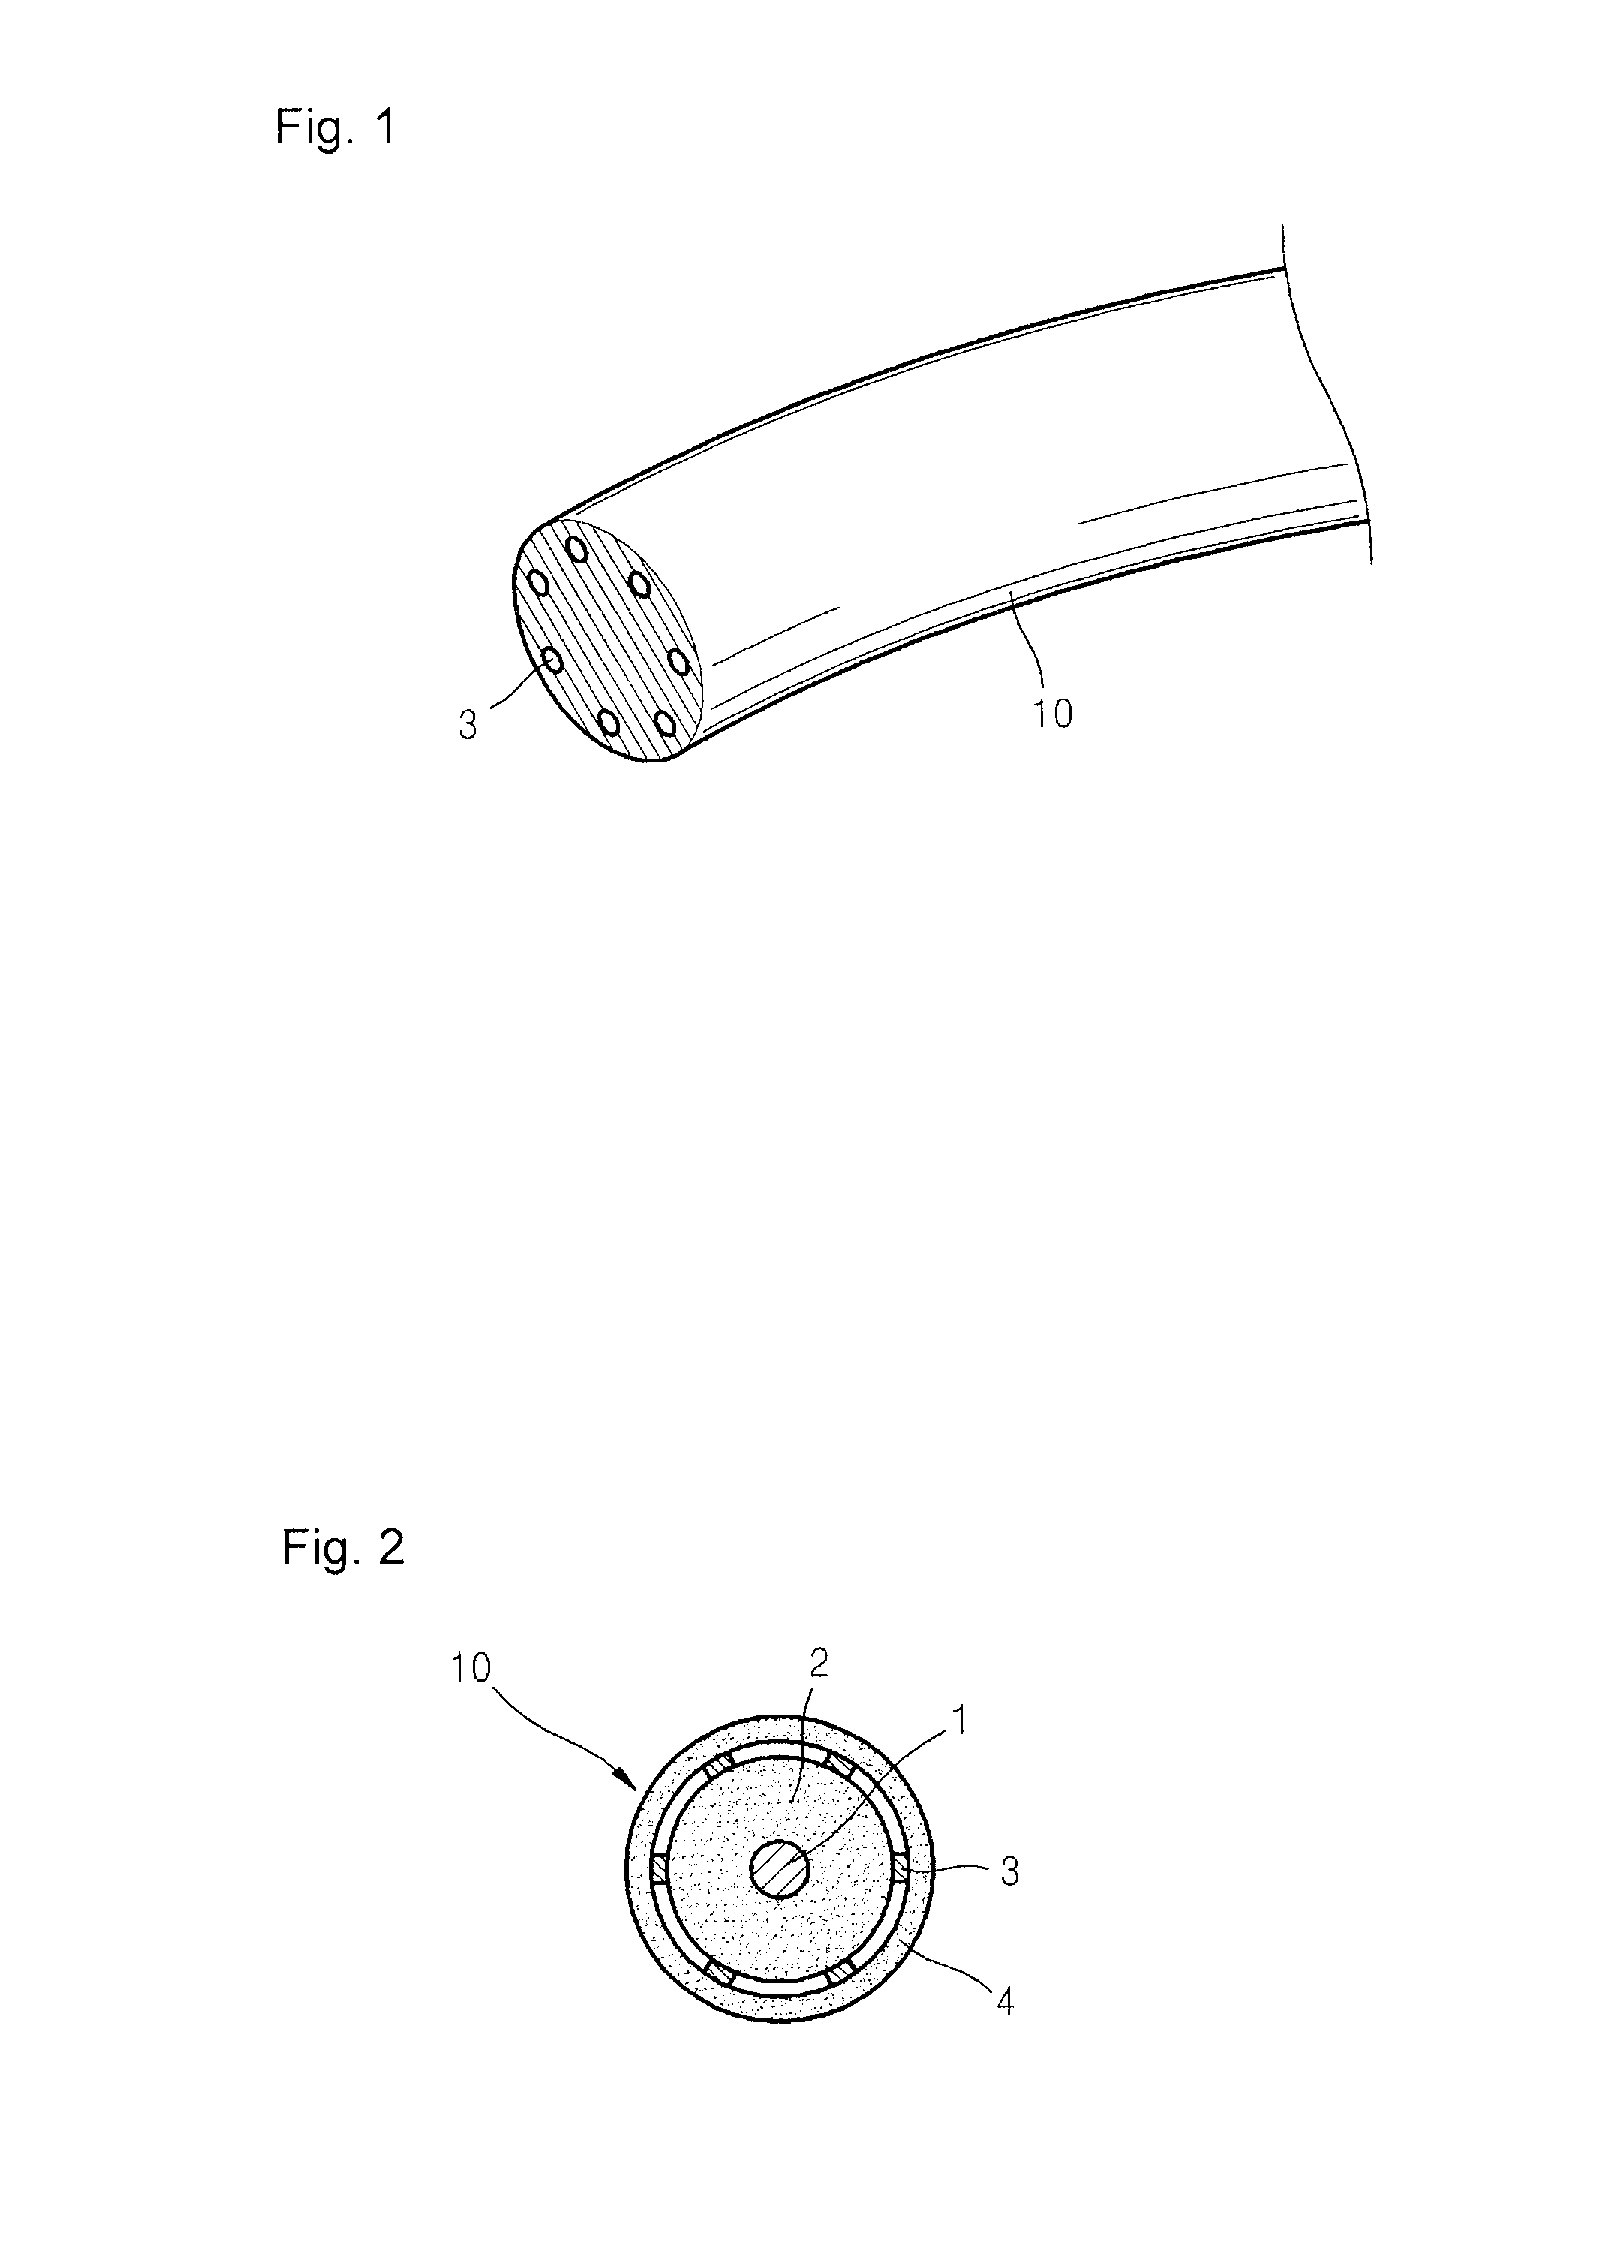 Method for forming a heating element for use with a steering wheel